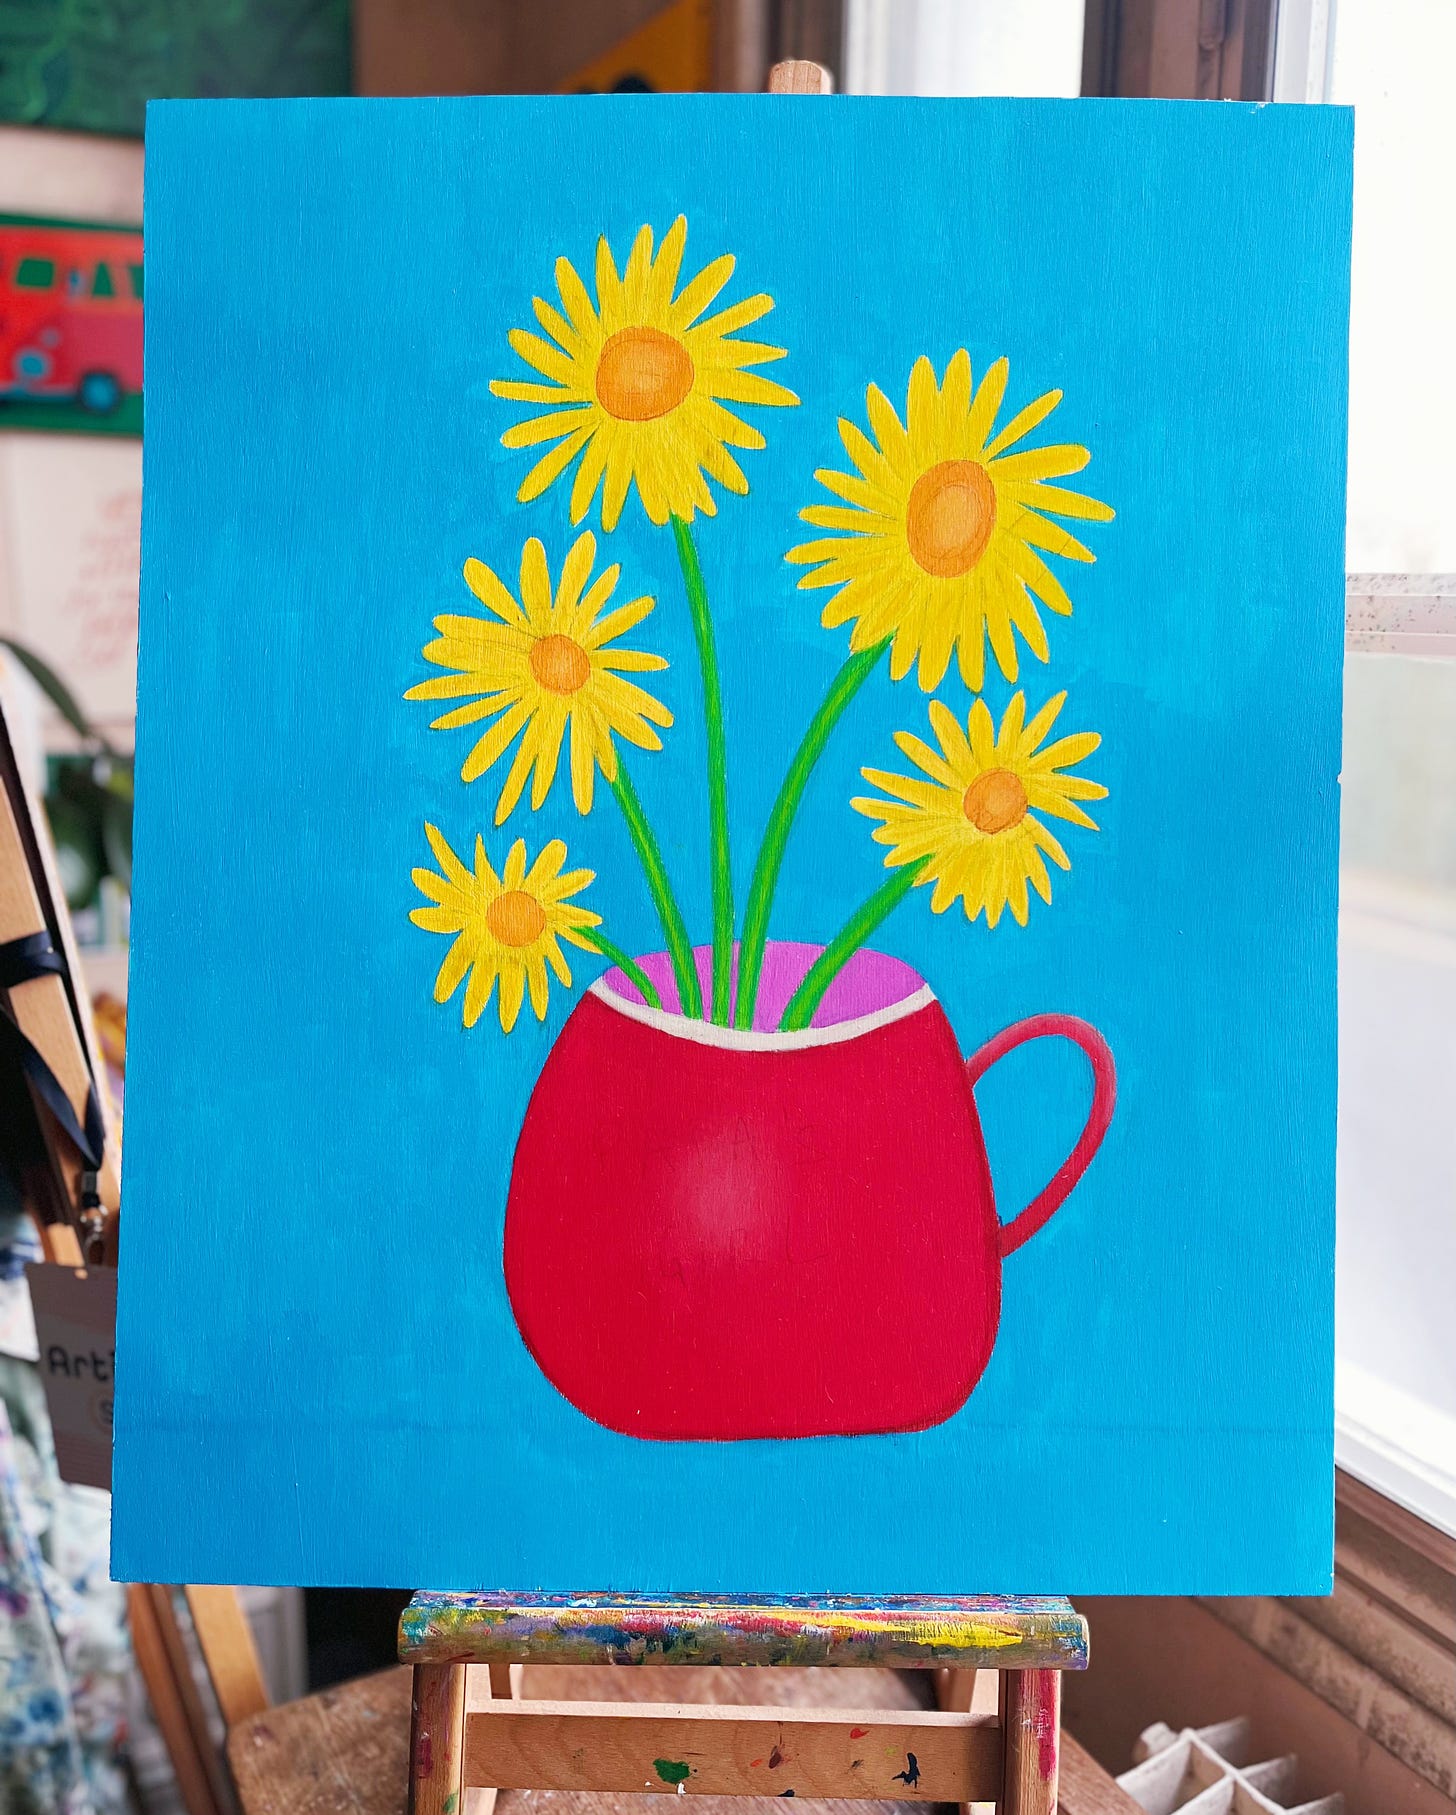 A painting of five yellow flowers in a red vase on a blue background